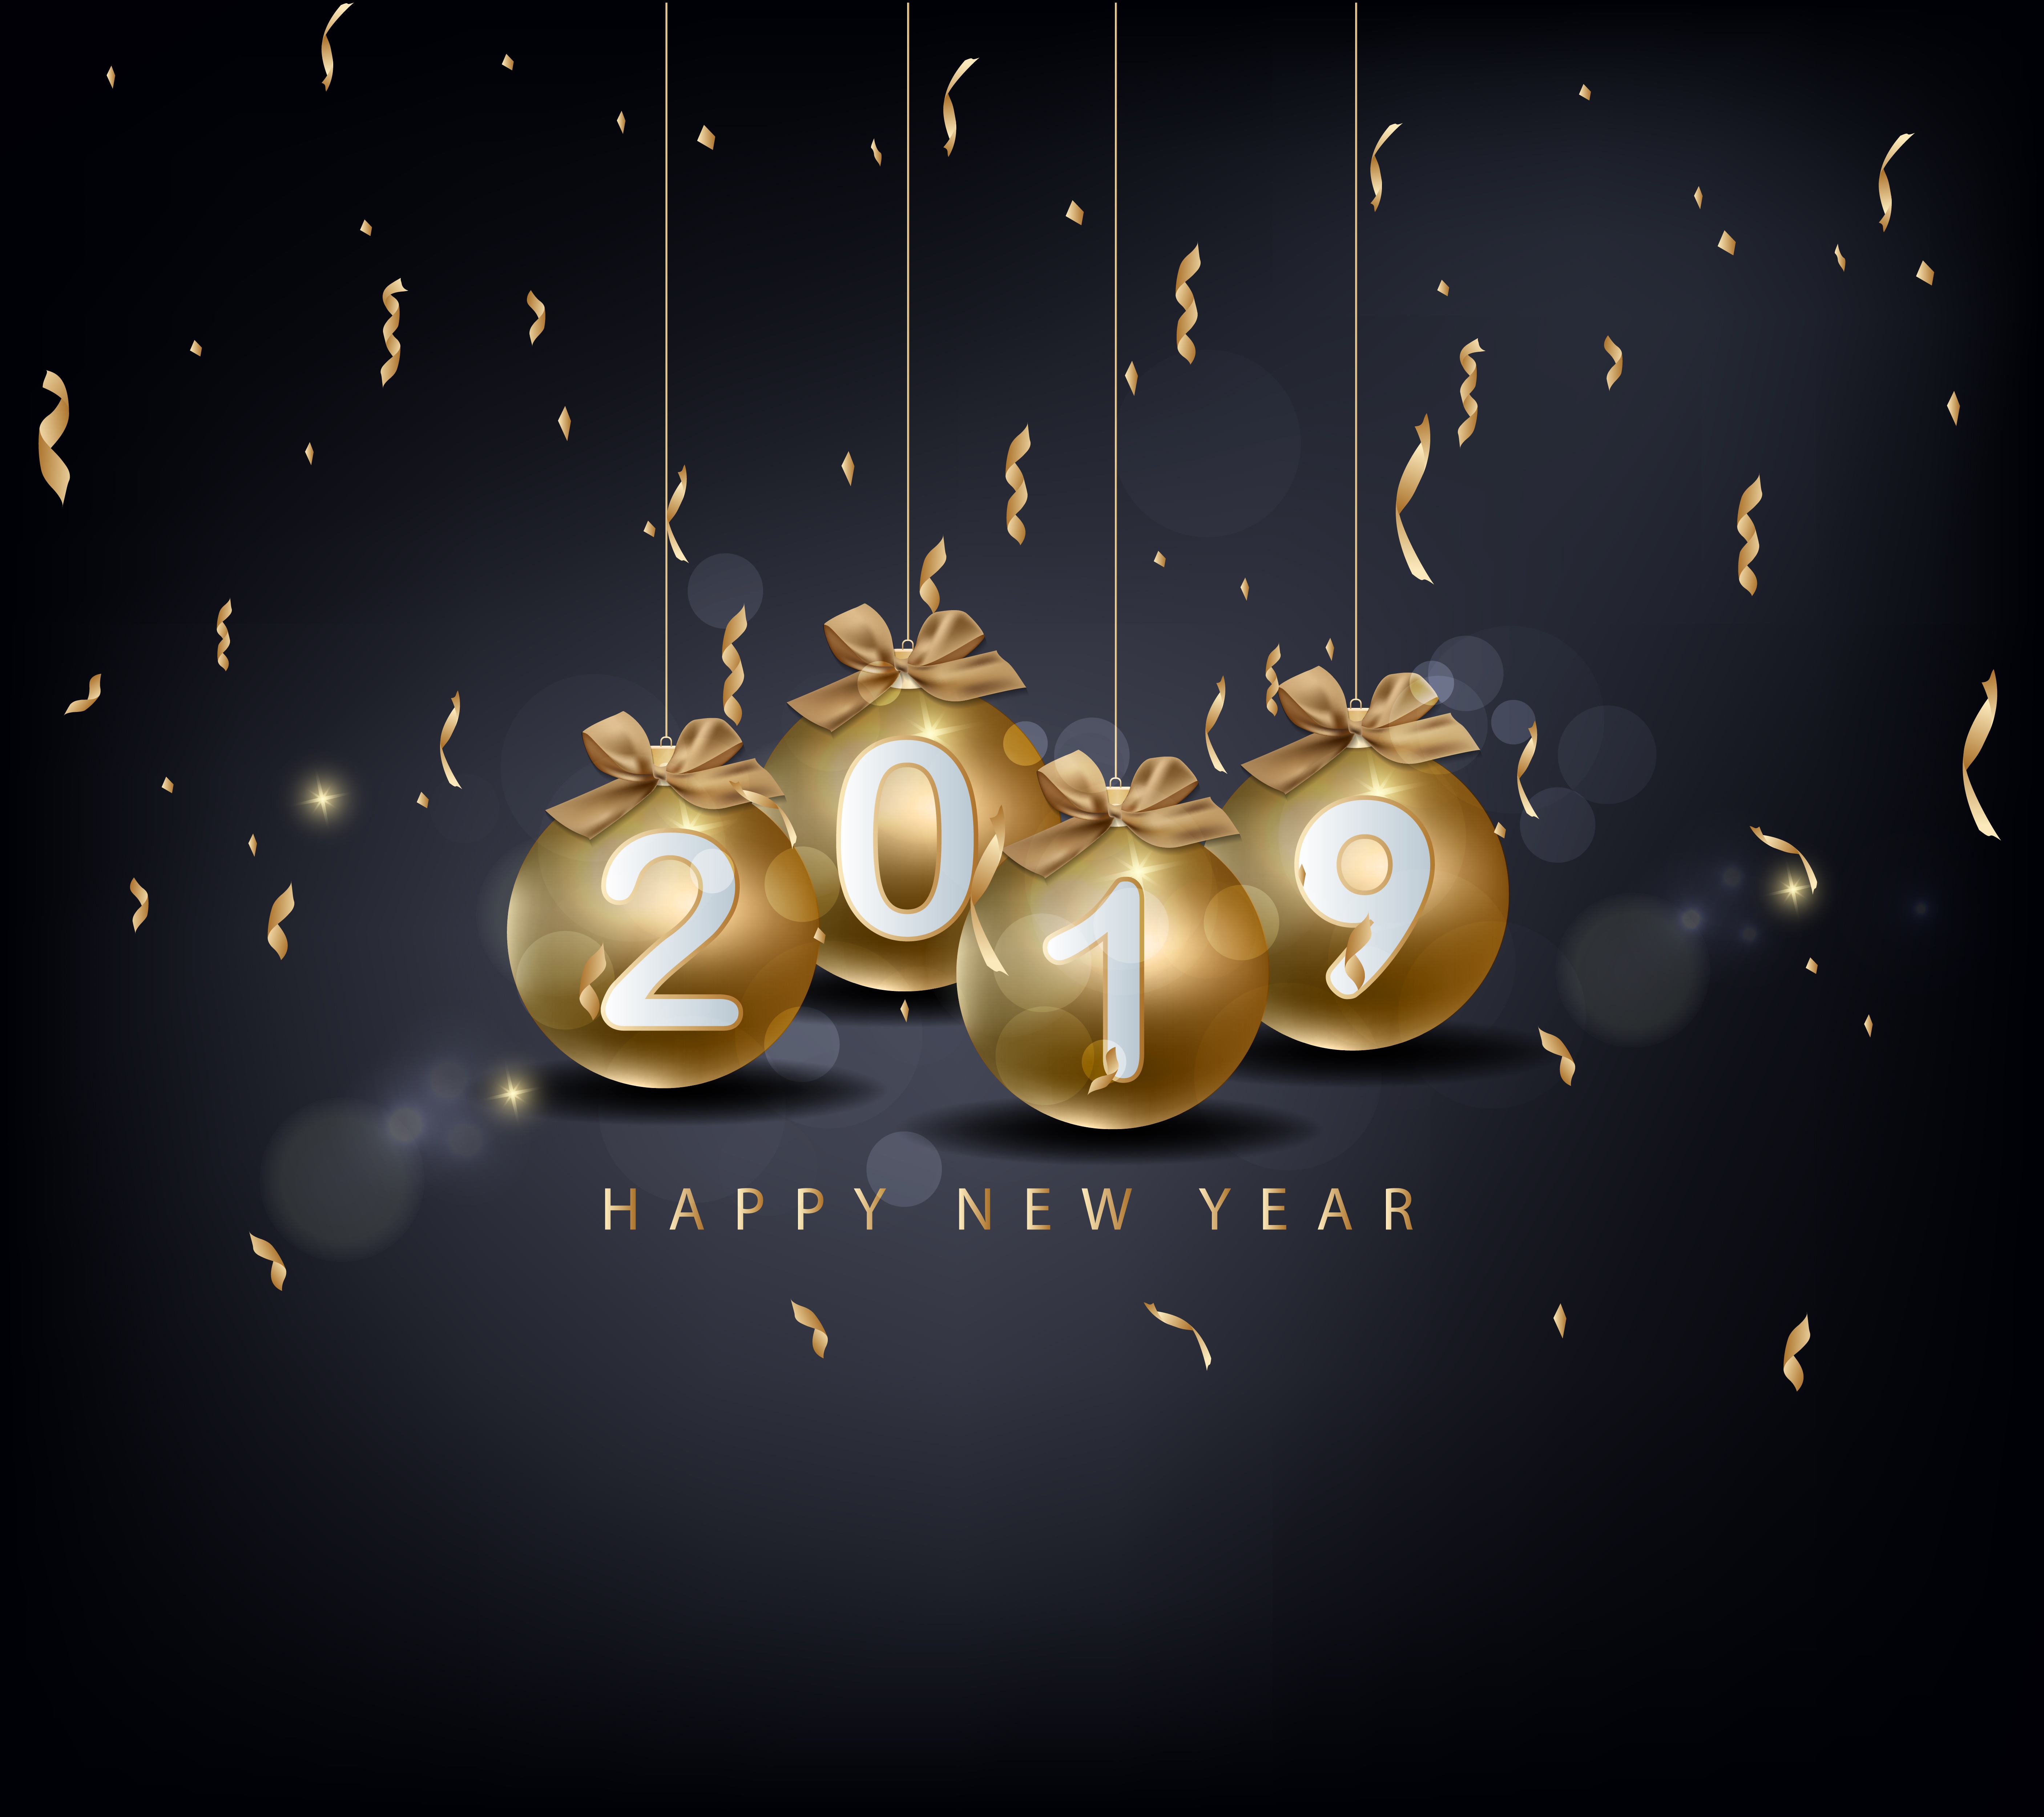 holiday, new year 2019, bauble, happy new year